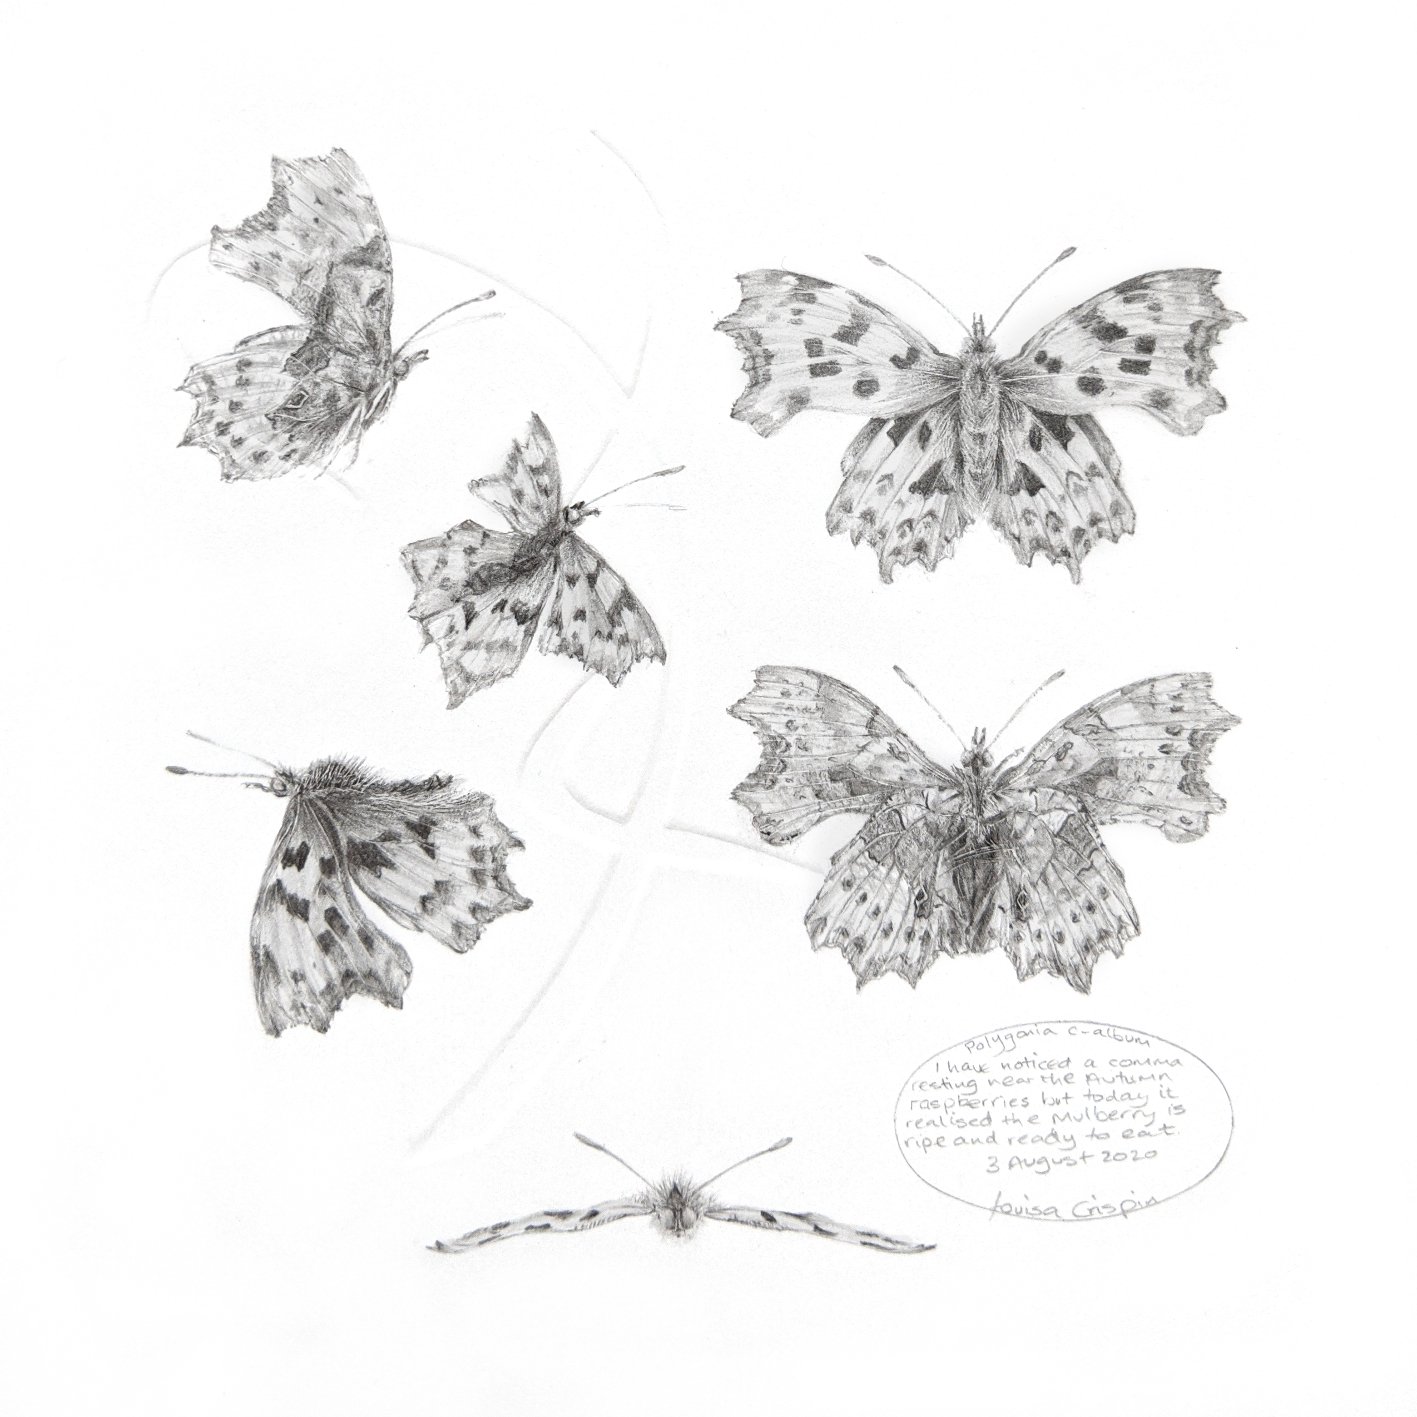 Louisa Crispin_Study of a Butterfly 002 Comma.jpg